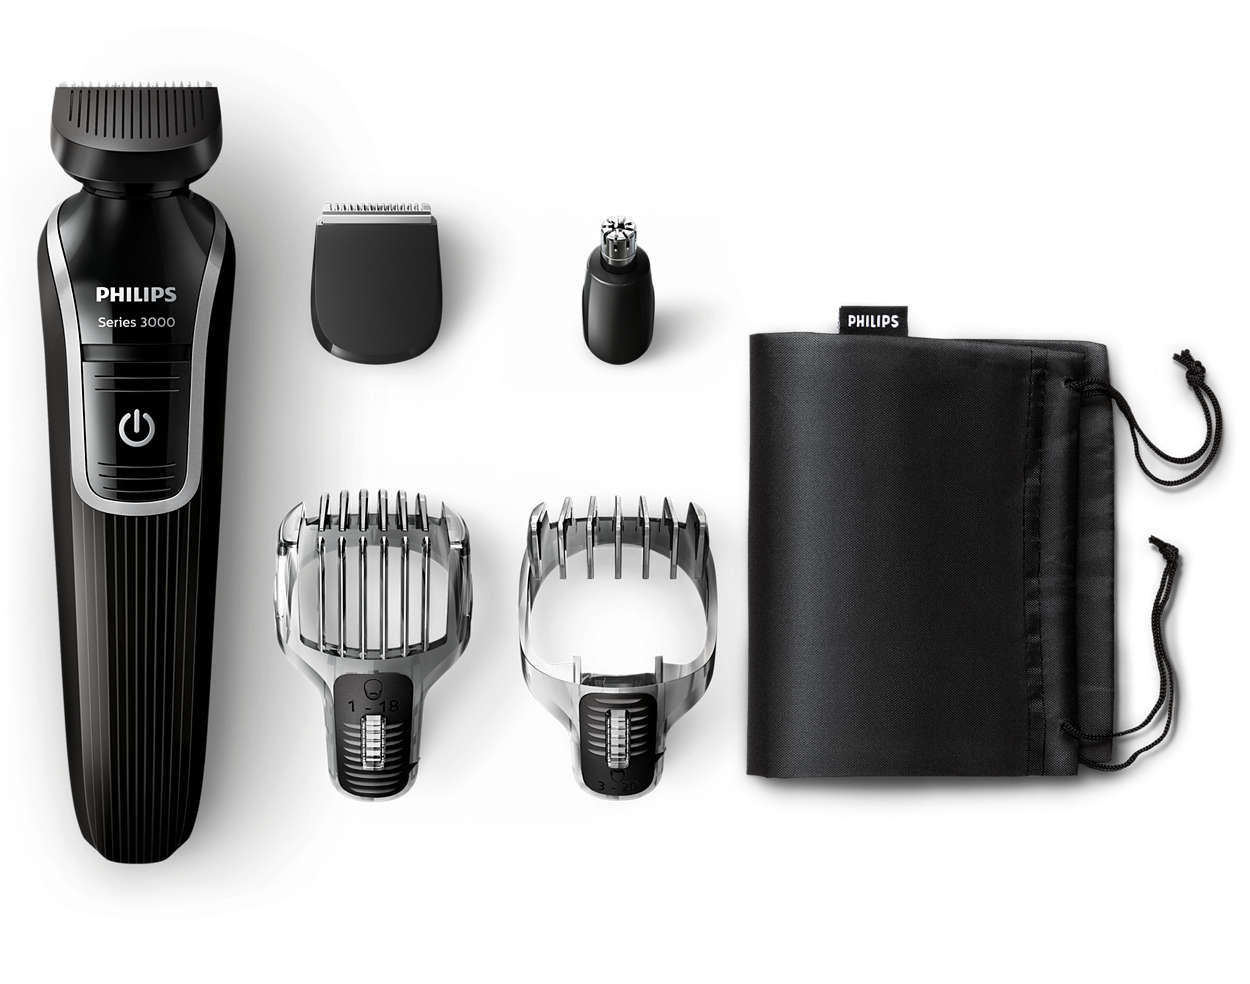 All-in-one beard & hair trimmer